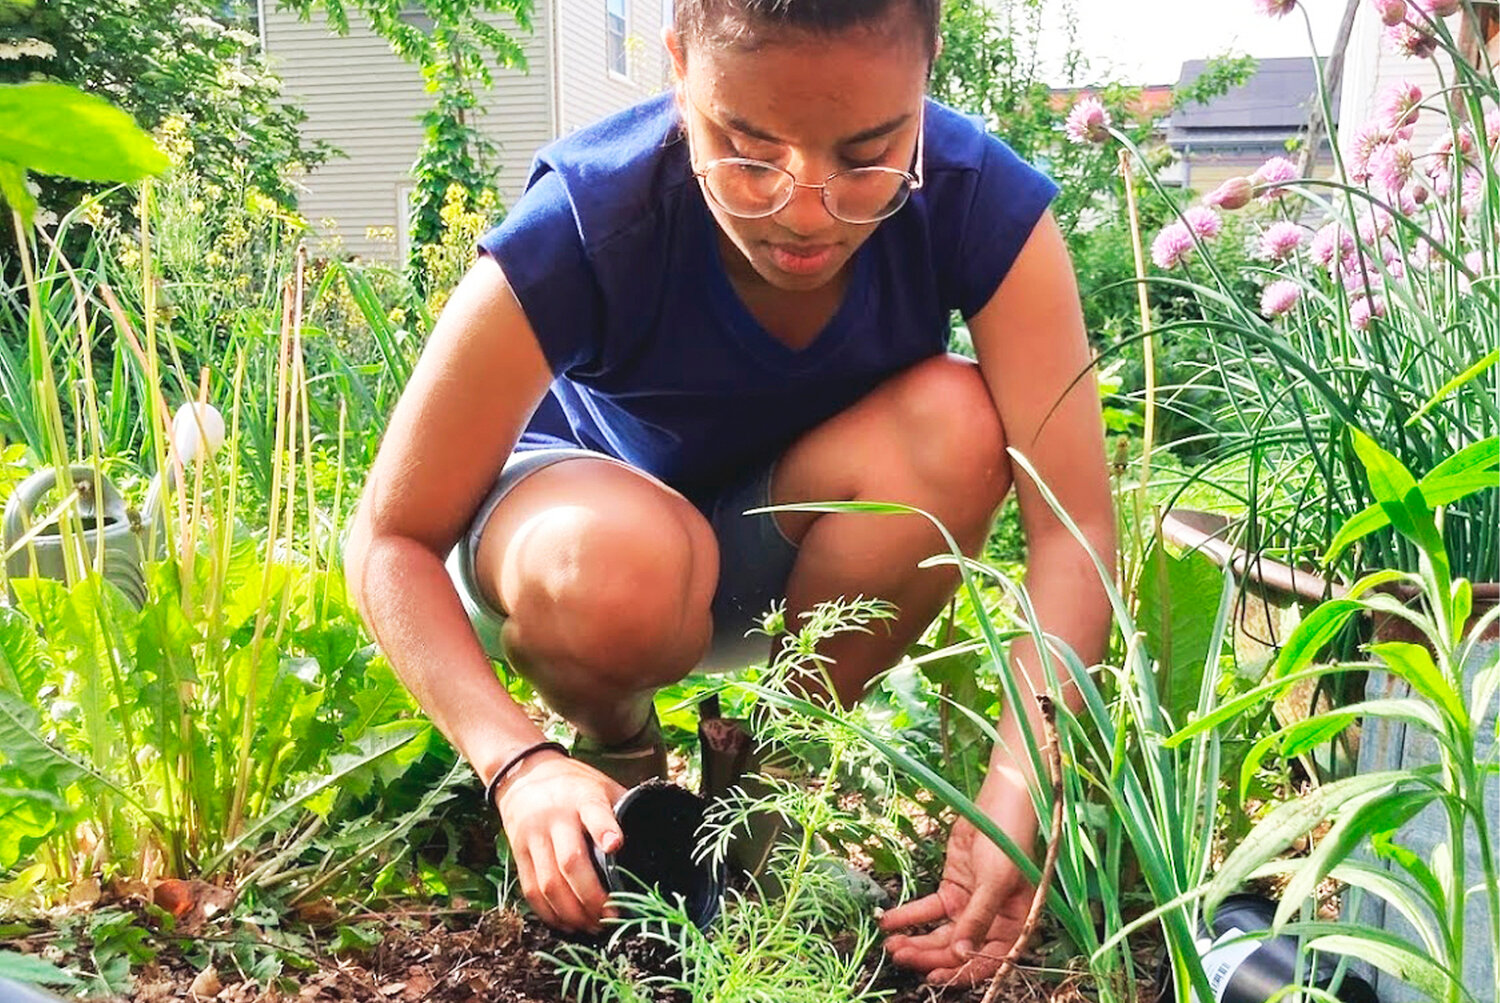 Gardening is just one way MEO students can spend time outdoors this summer